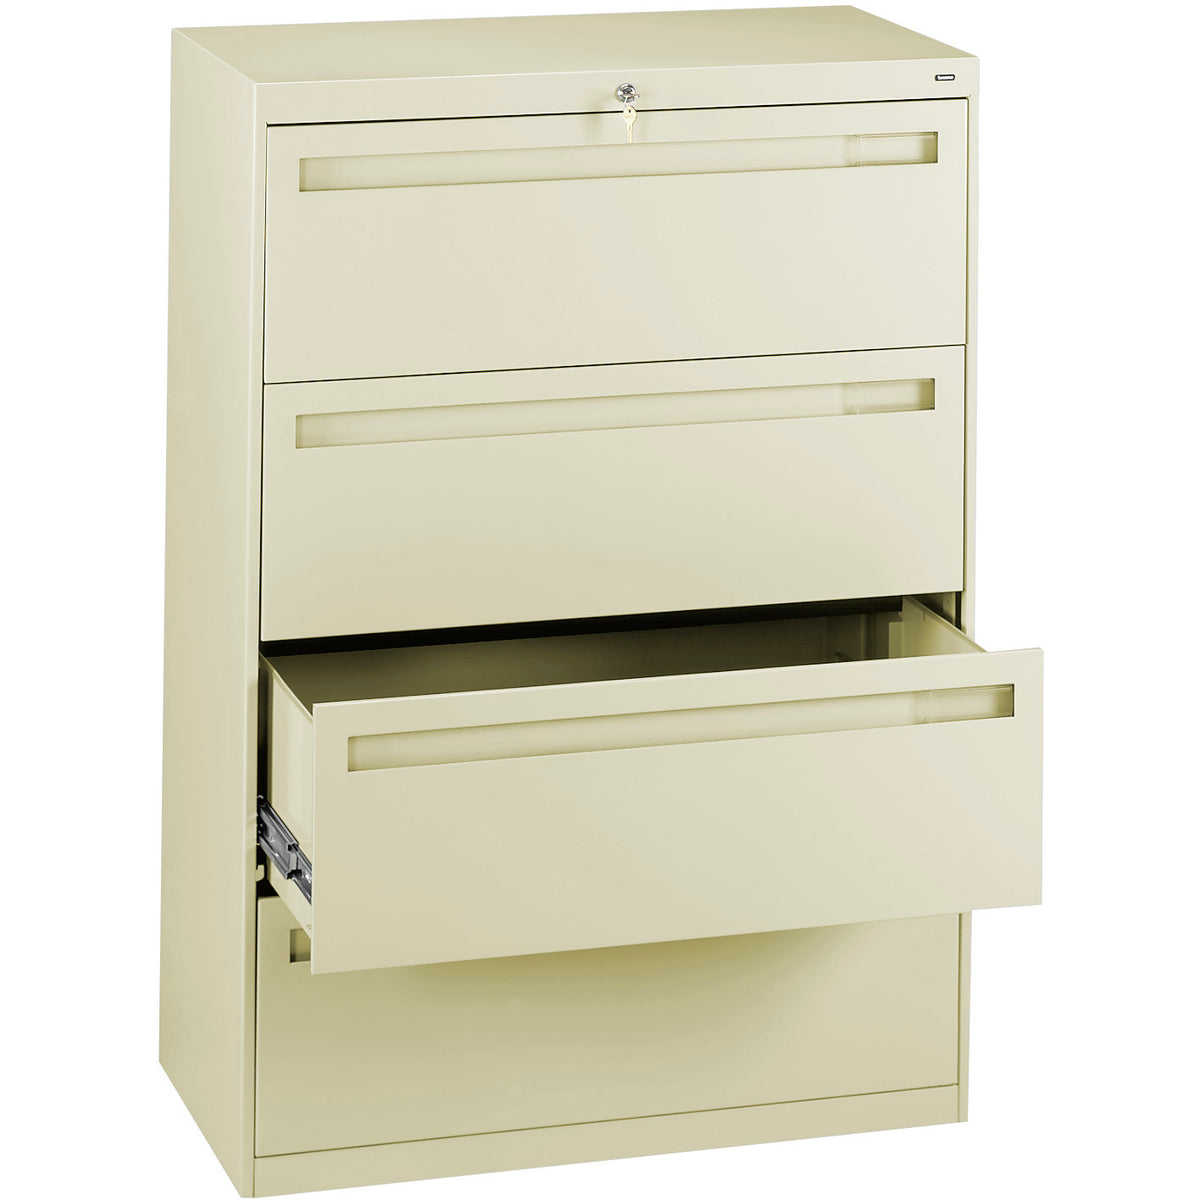 Tennsco 36" Wide Four-Drawer Lateral File with Fixed Drawer Fronts, LPL3648L40